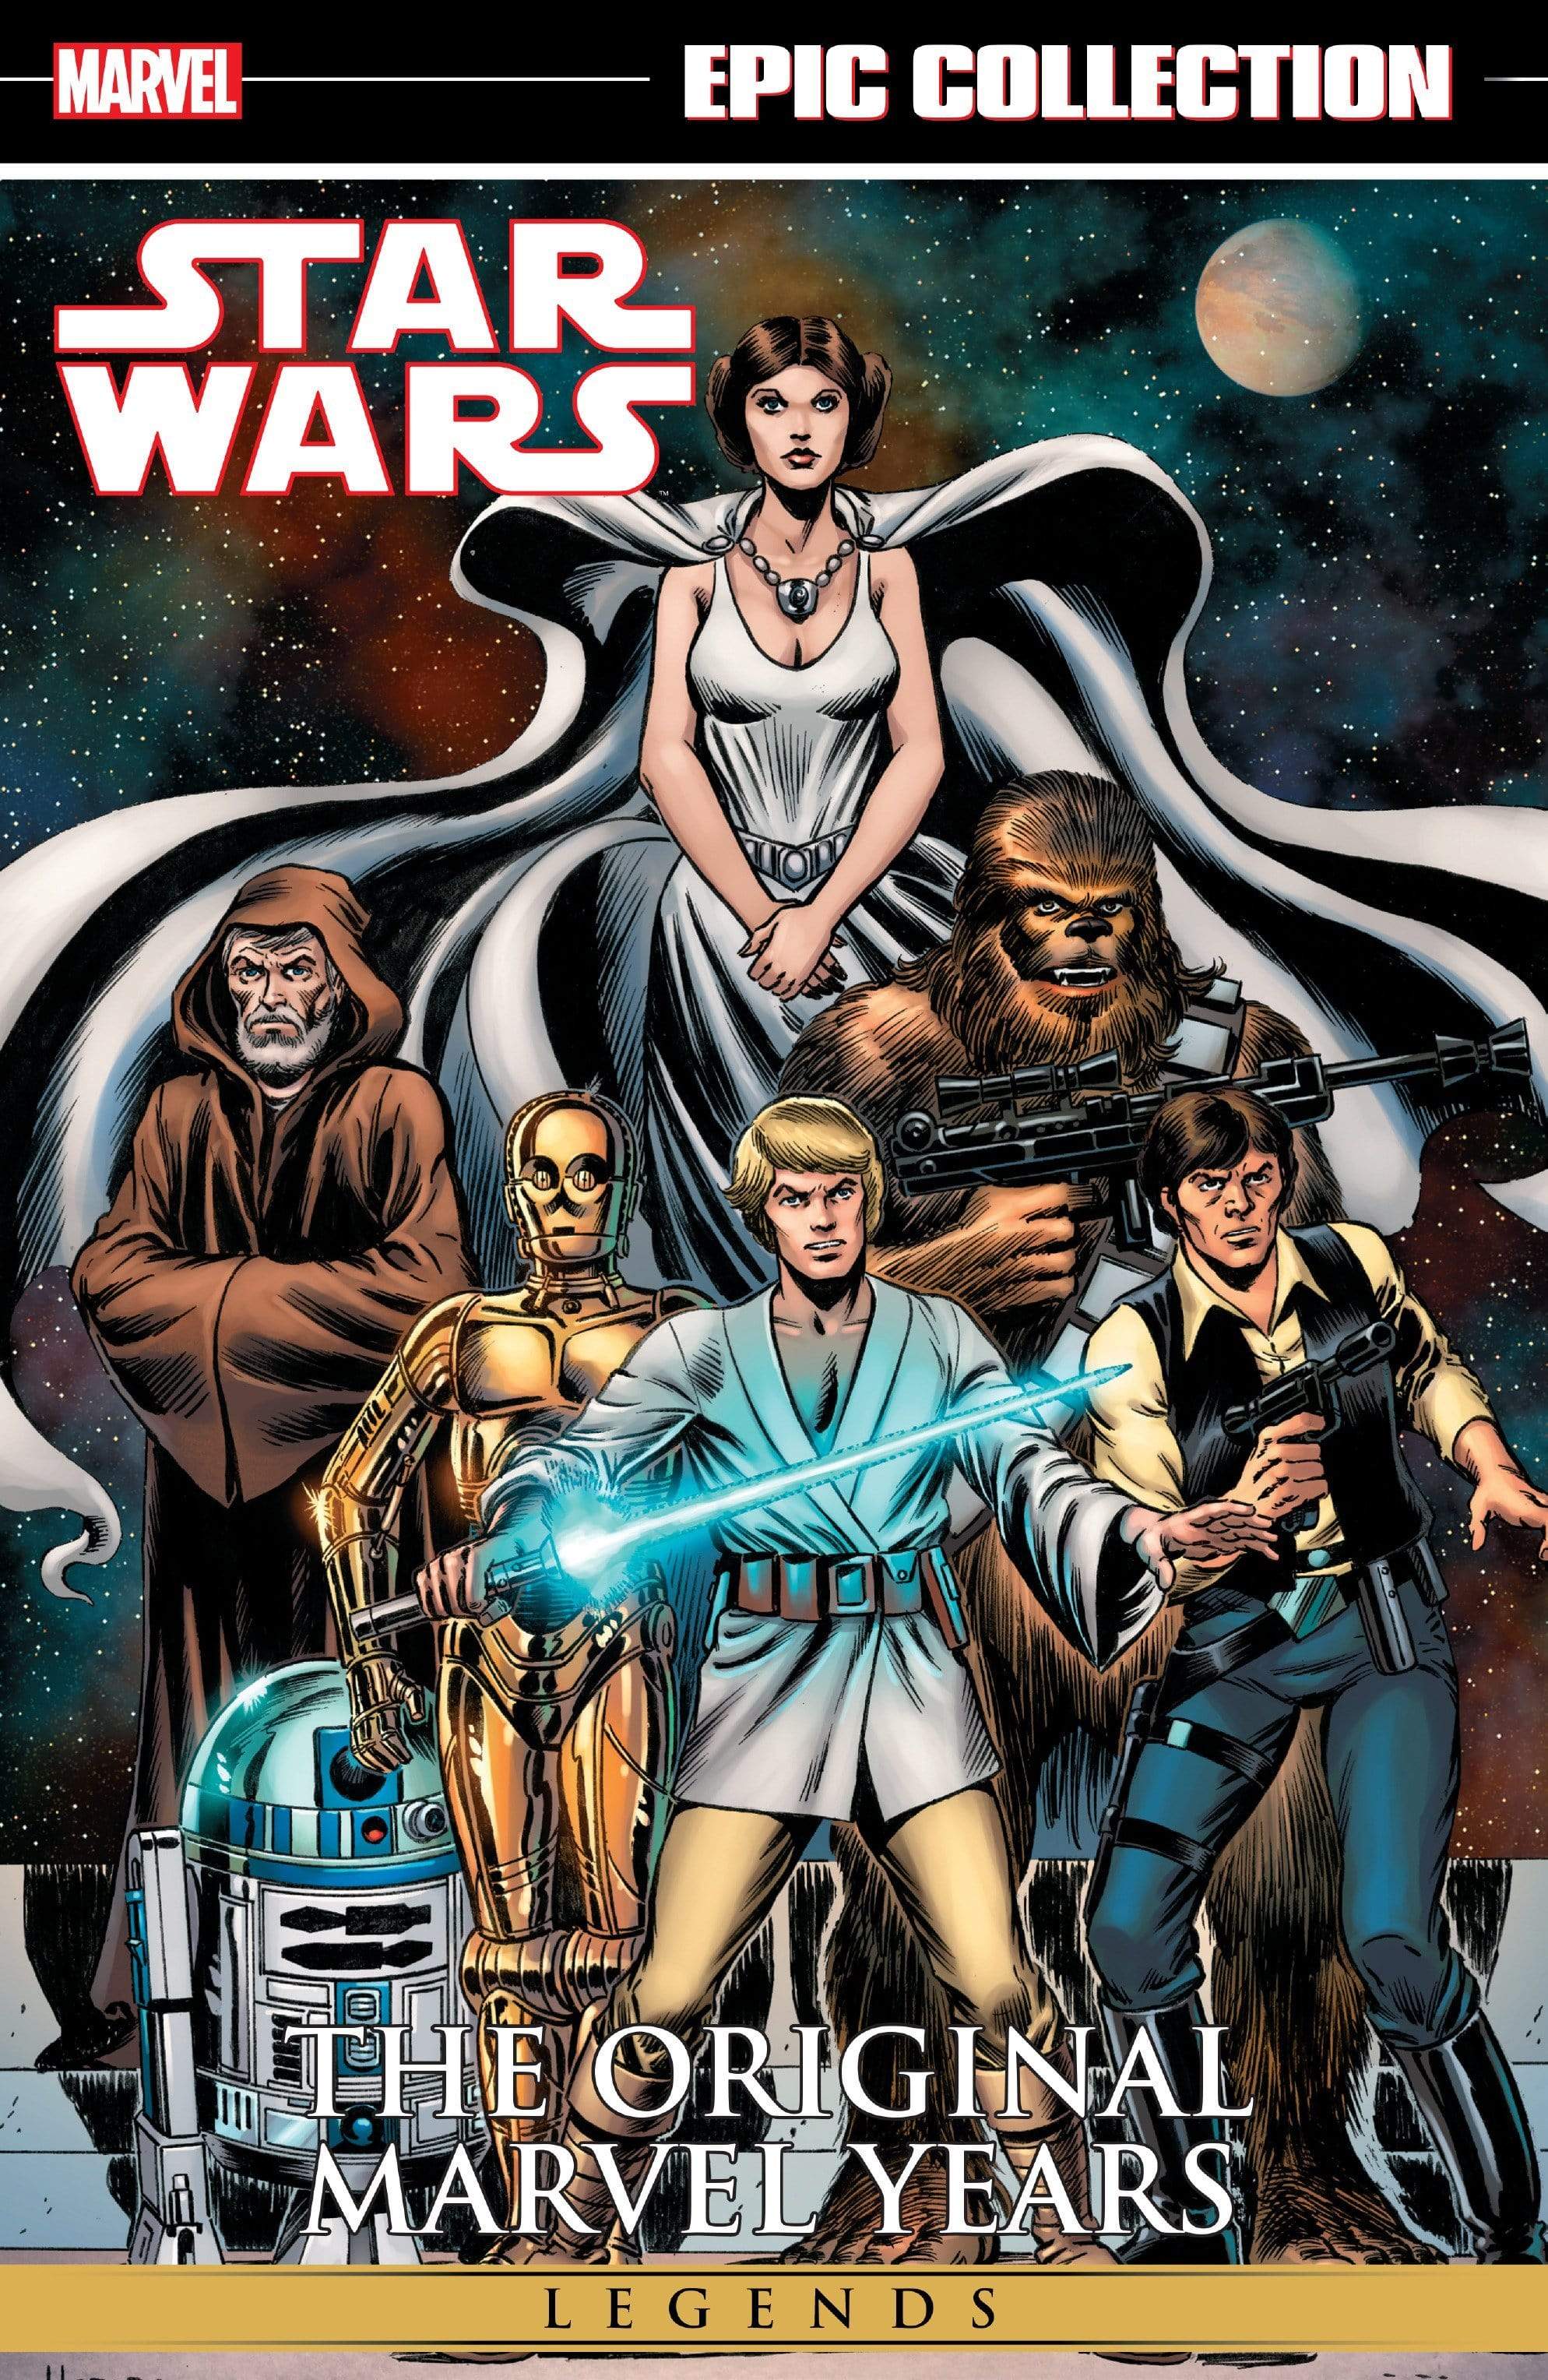 Marvel Epic Collection: Star Wars - The Original Marvel Years Vol